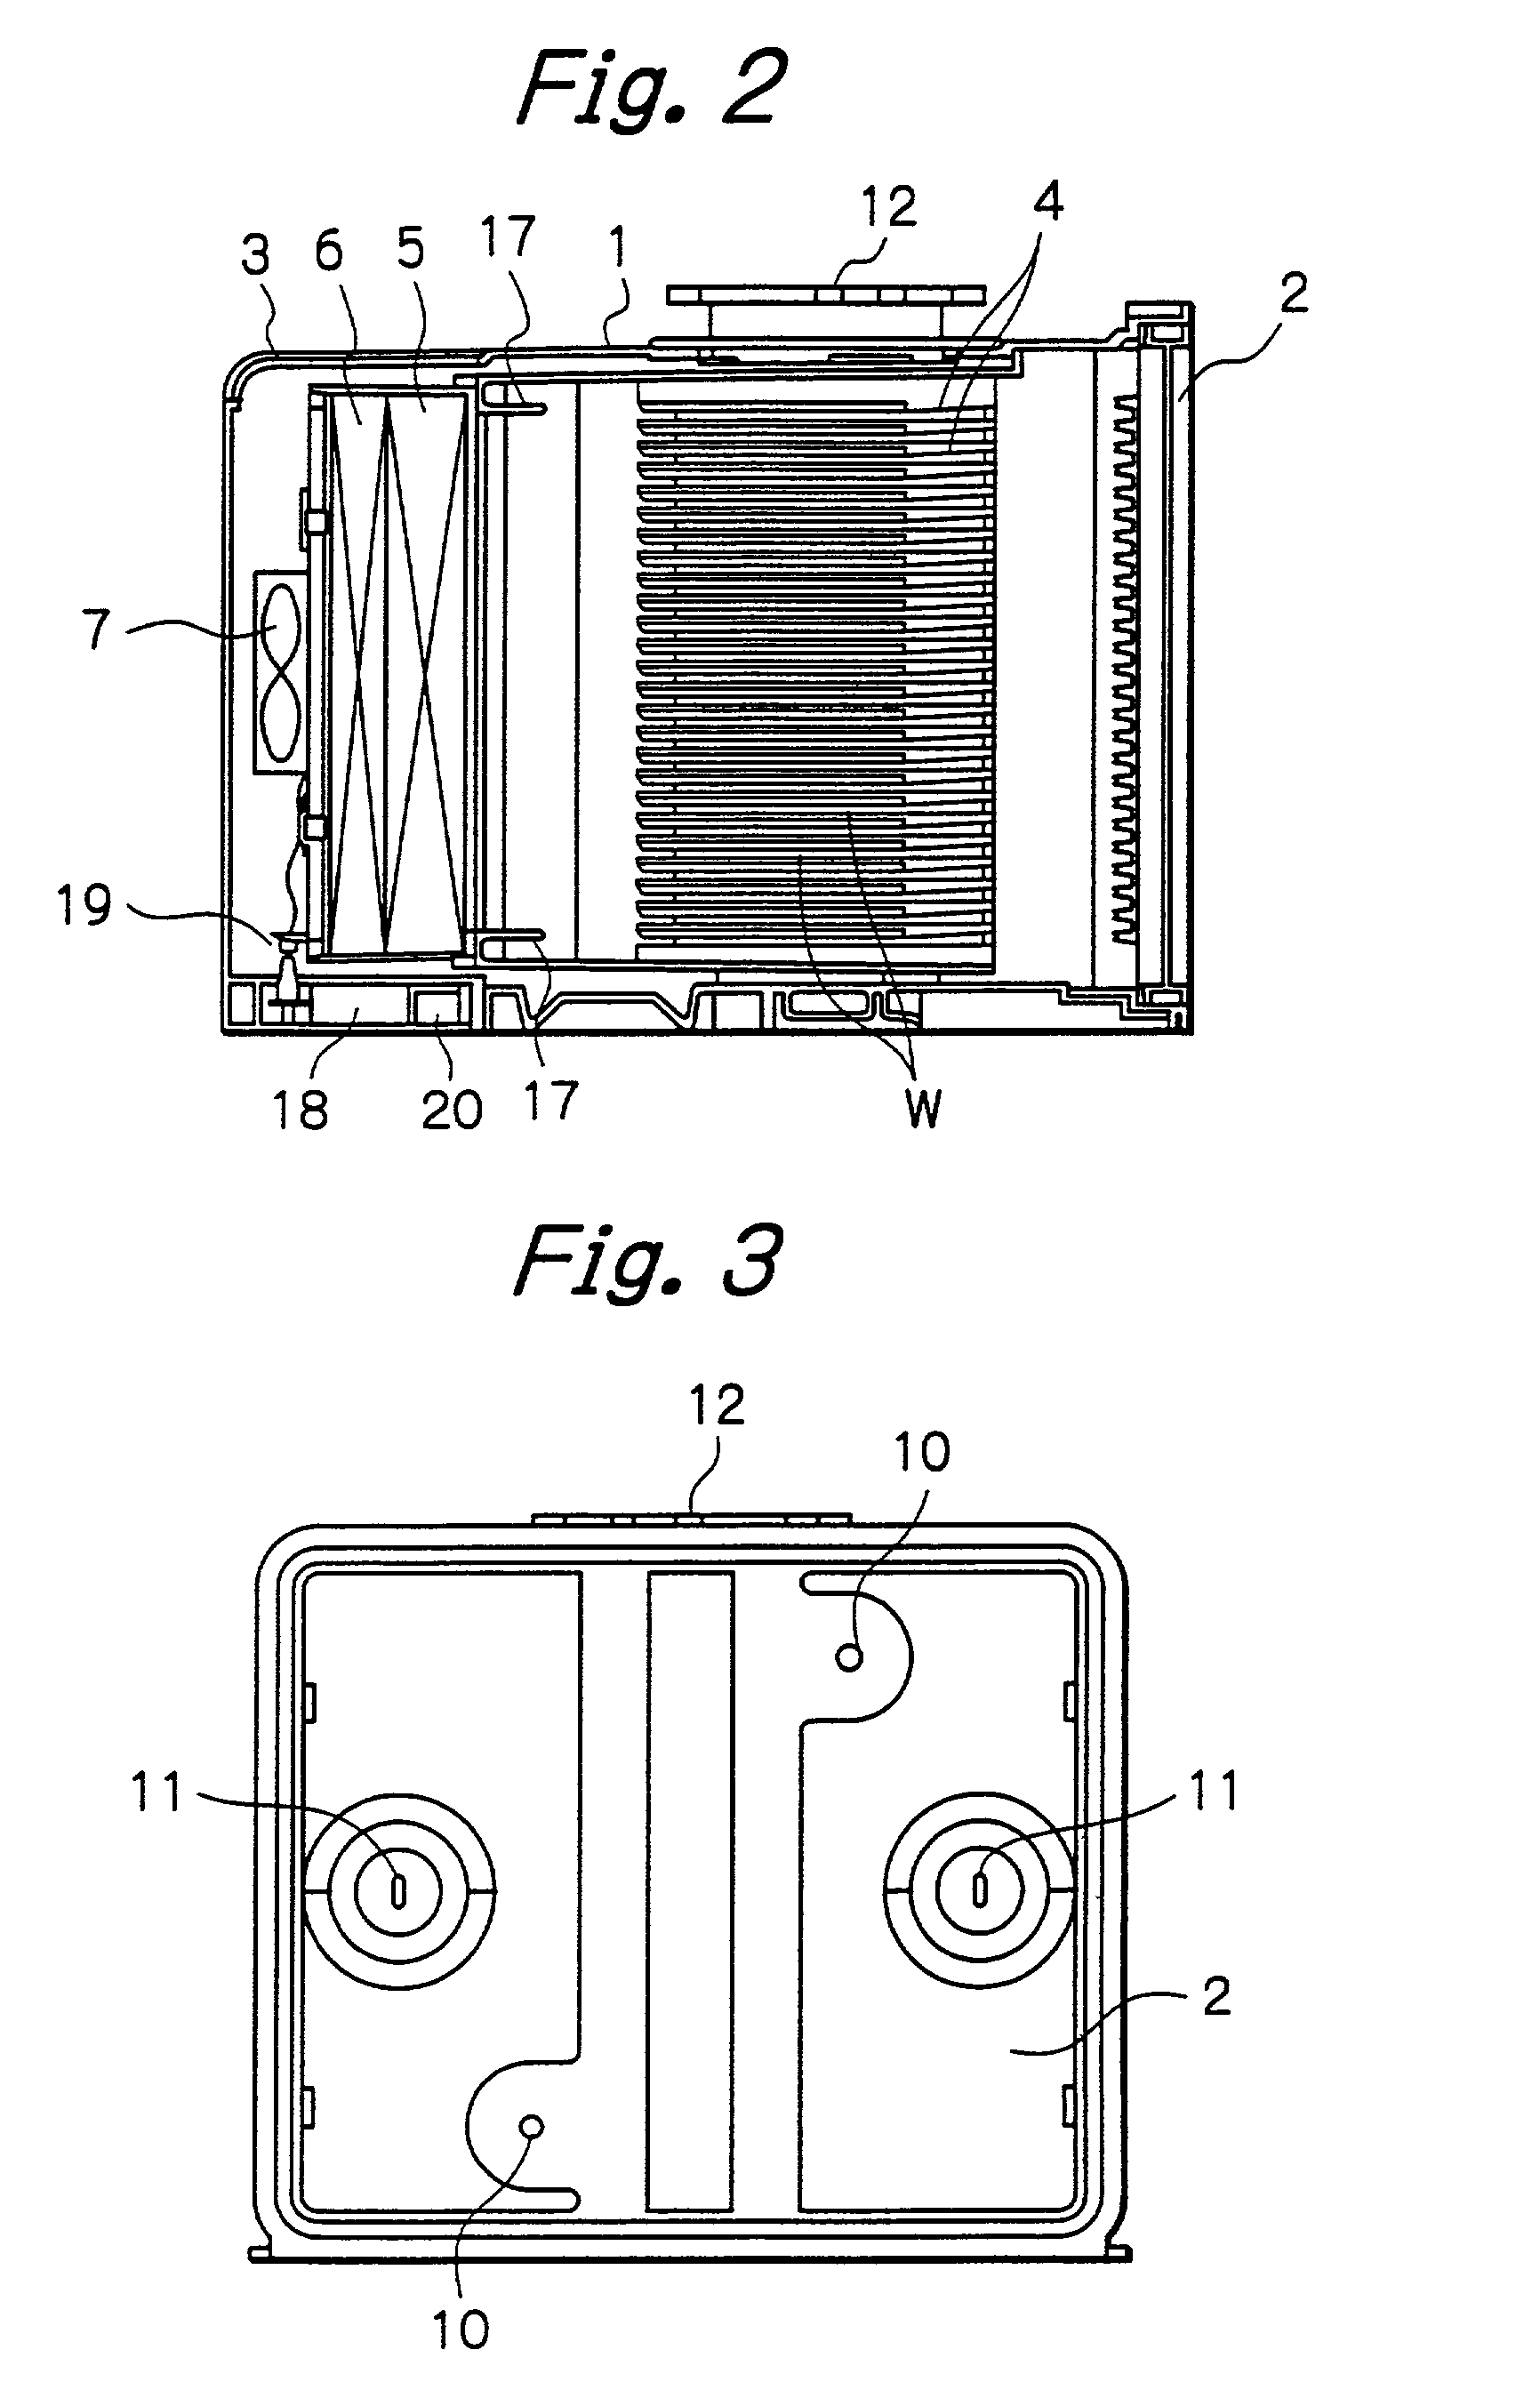 Substrate transport container